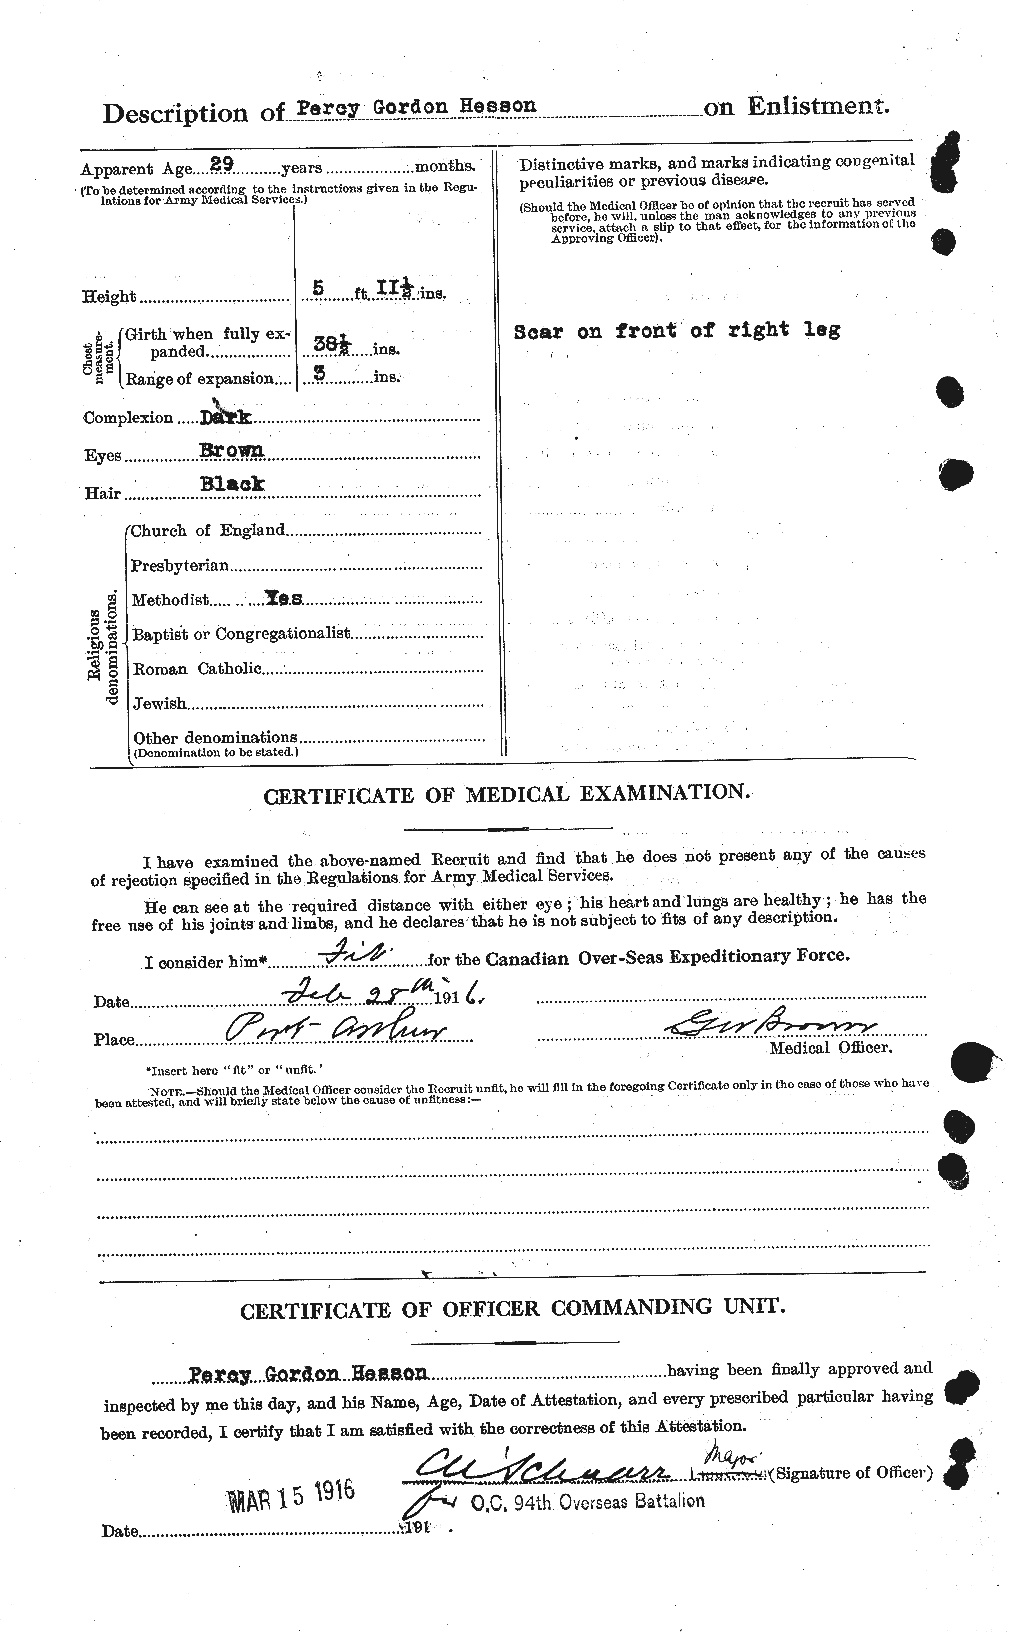 Personnel Records of the First World War - CEF 390642b